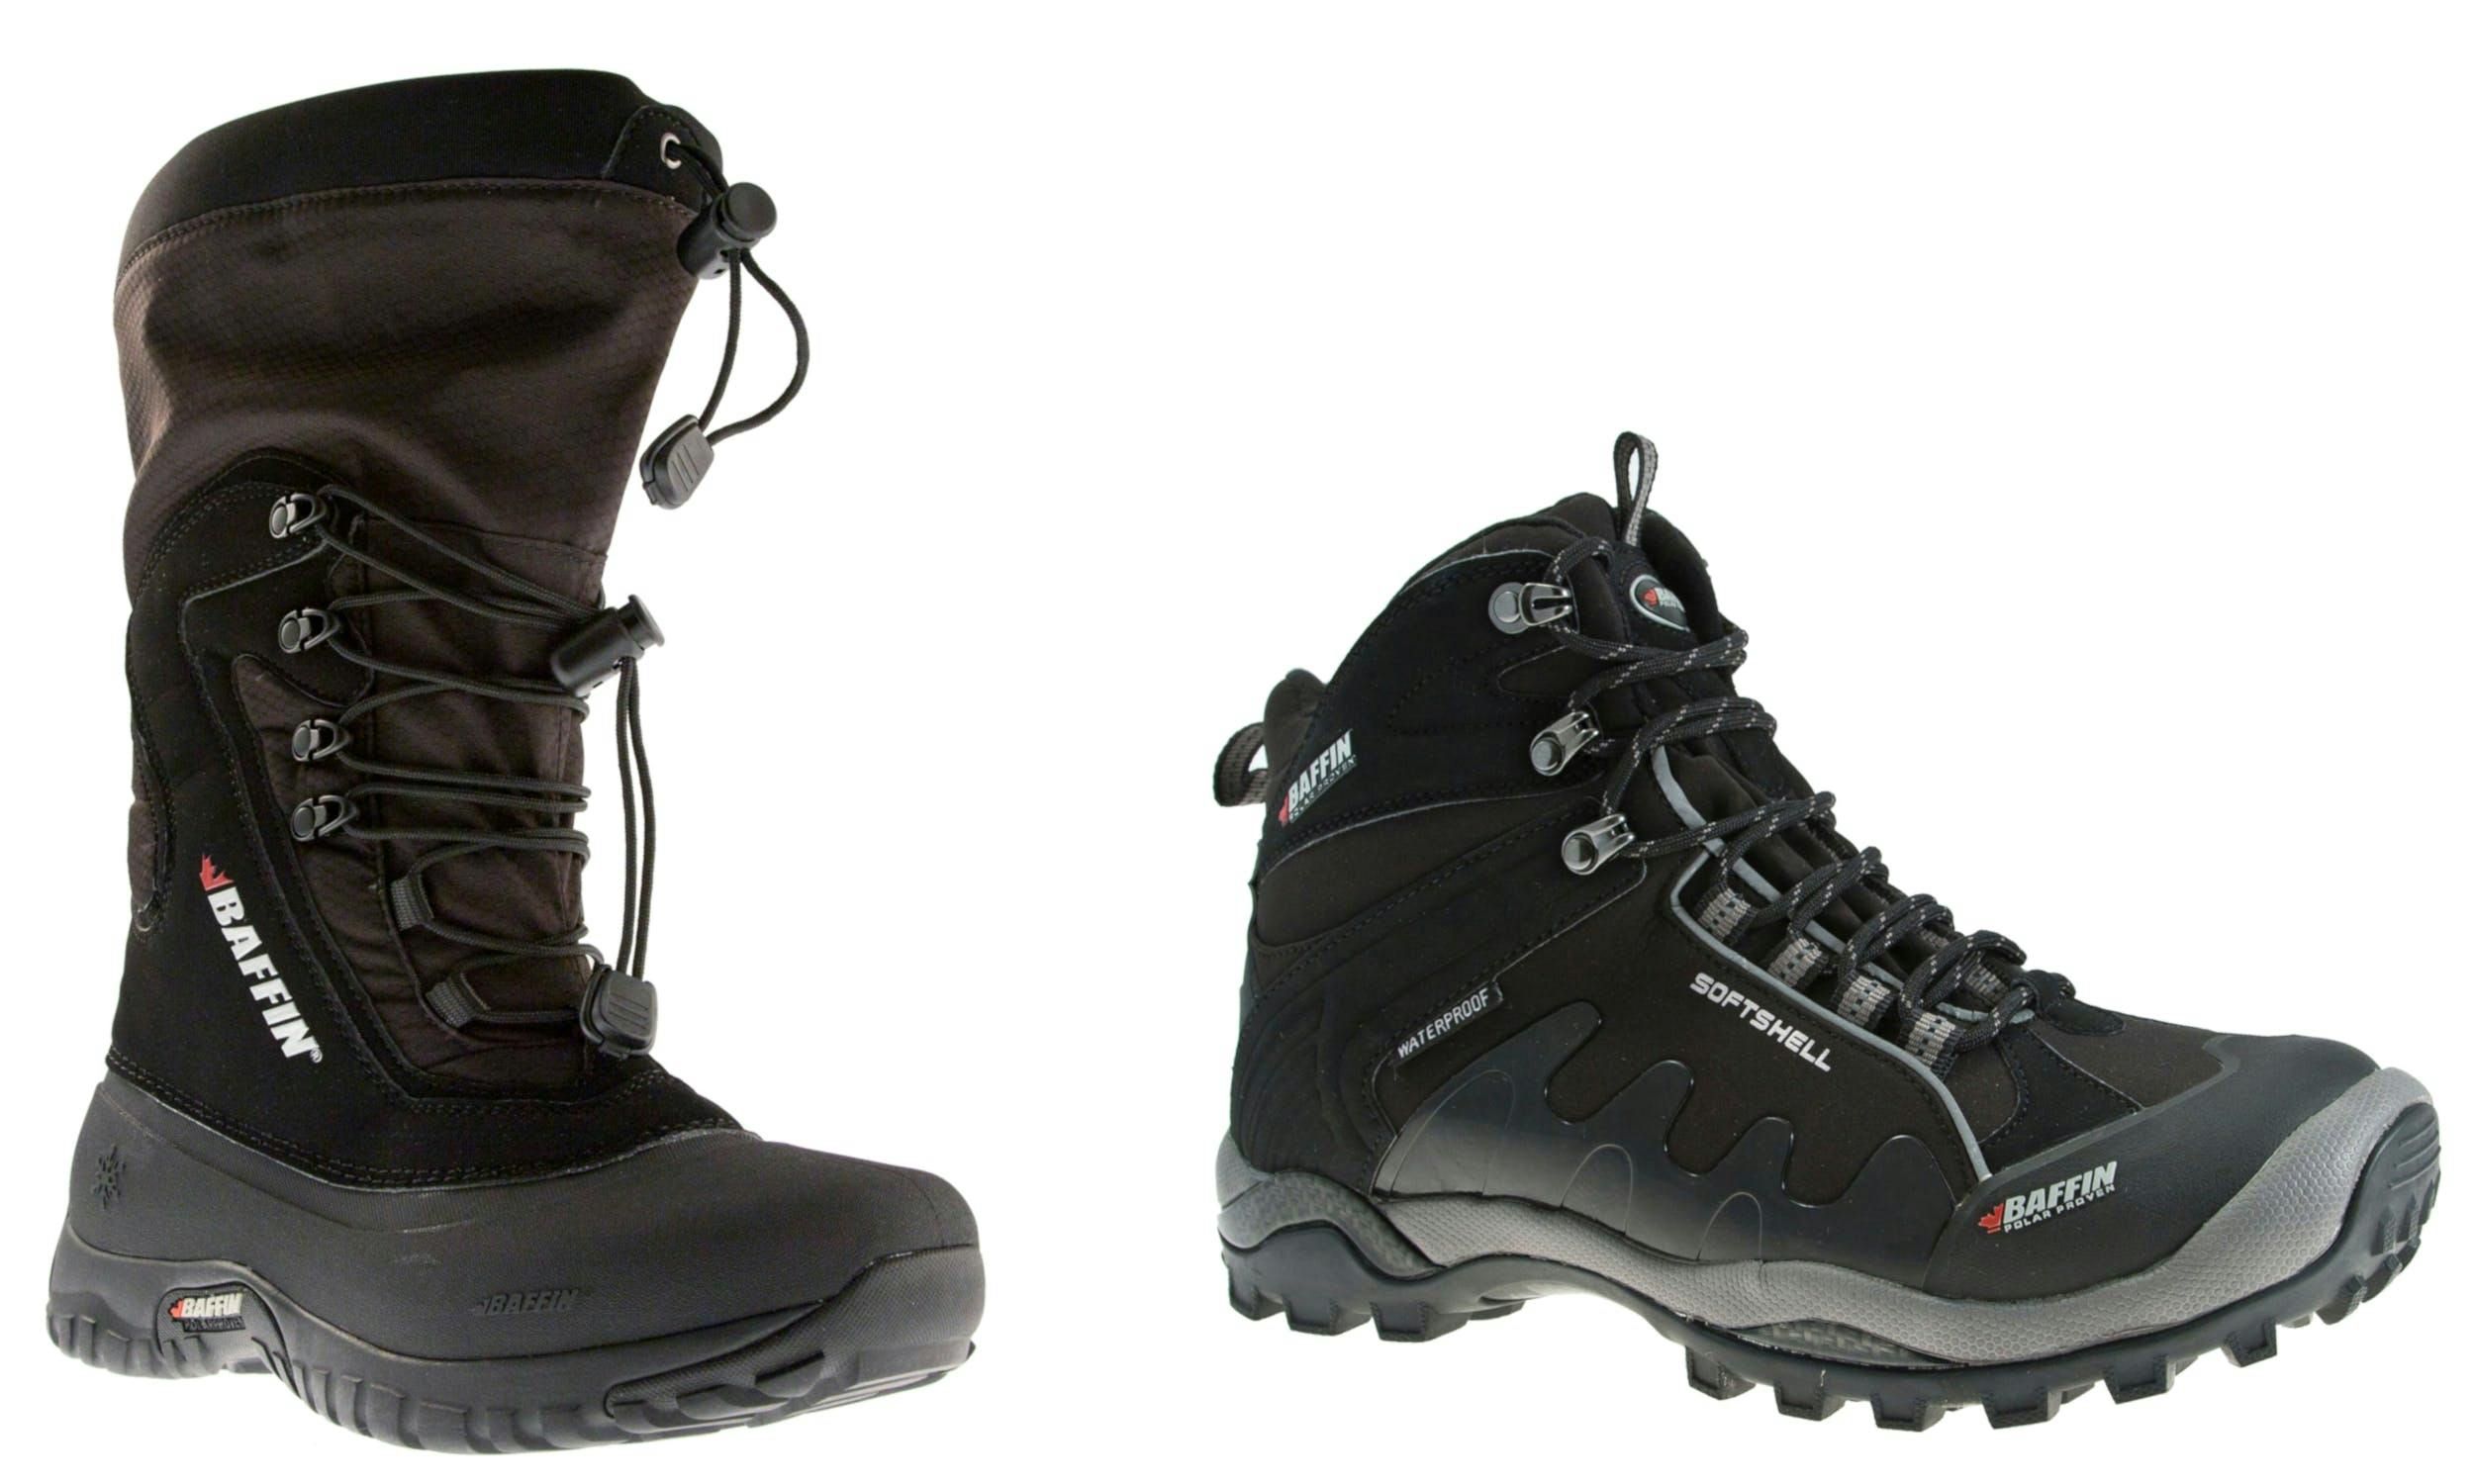 Baffin Flare boots and Baffin Zone boots